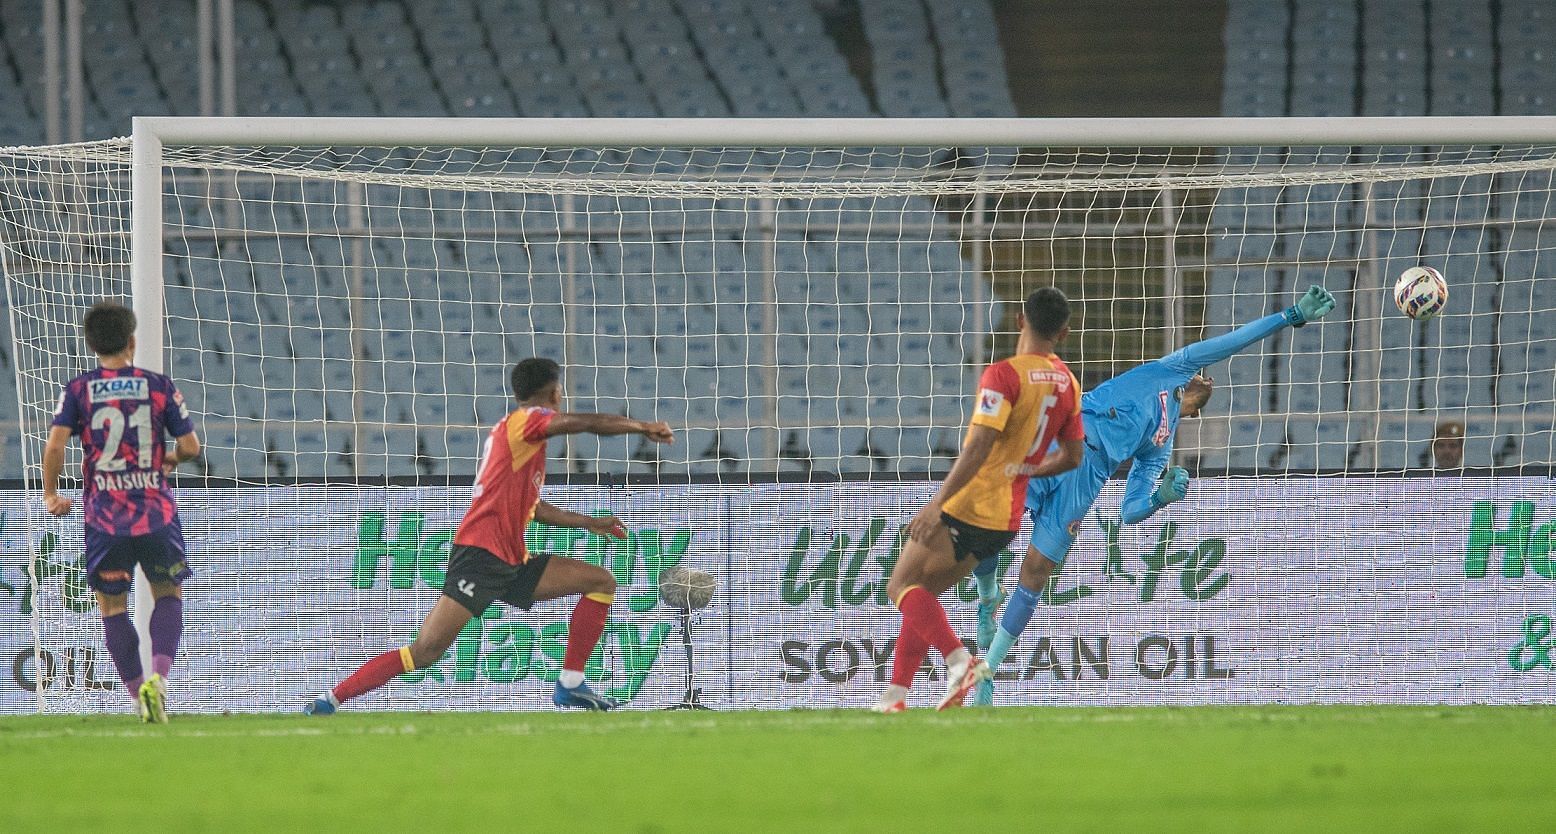 East Bengal lost the game 1-2 against Kerala Blasters (Image courtesy: ISL Media)